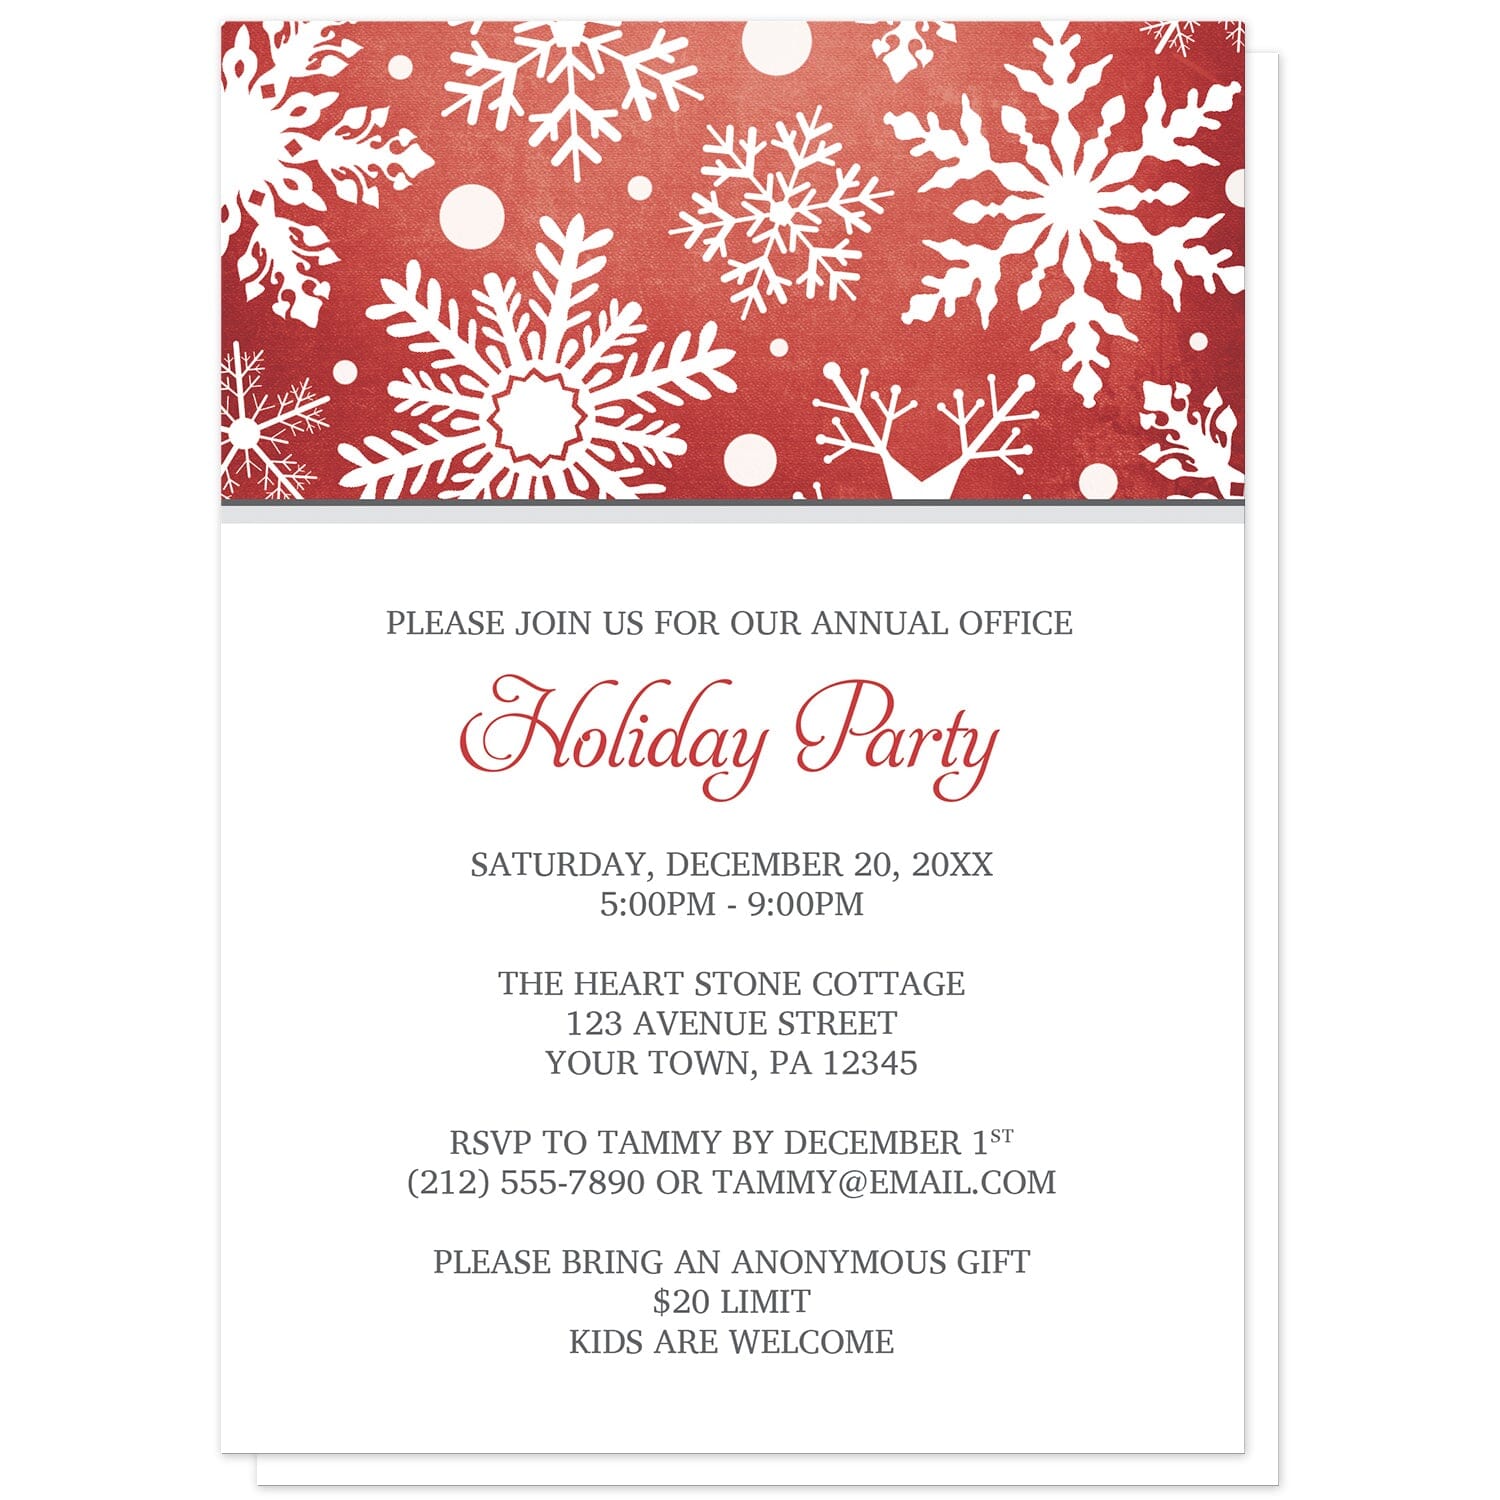 Winter Snowflake Red Gray Holiday Party Invitations at Artistically Invited. Modern winter snowflake red gray holiday party invitations designed with a white snowflakes pattern over an organic red wintry background at the top of the invitations. Your personalized holiday celebration details are custom printed in red and gray on white below the snowflakes. 